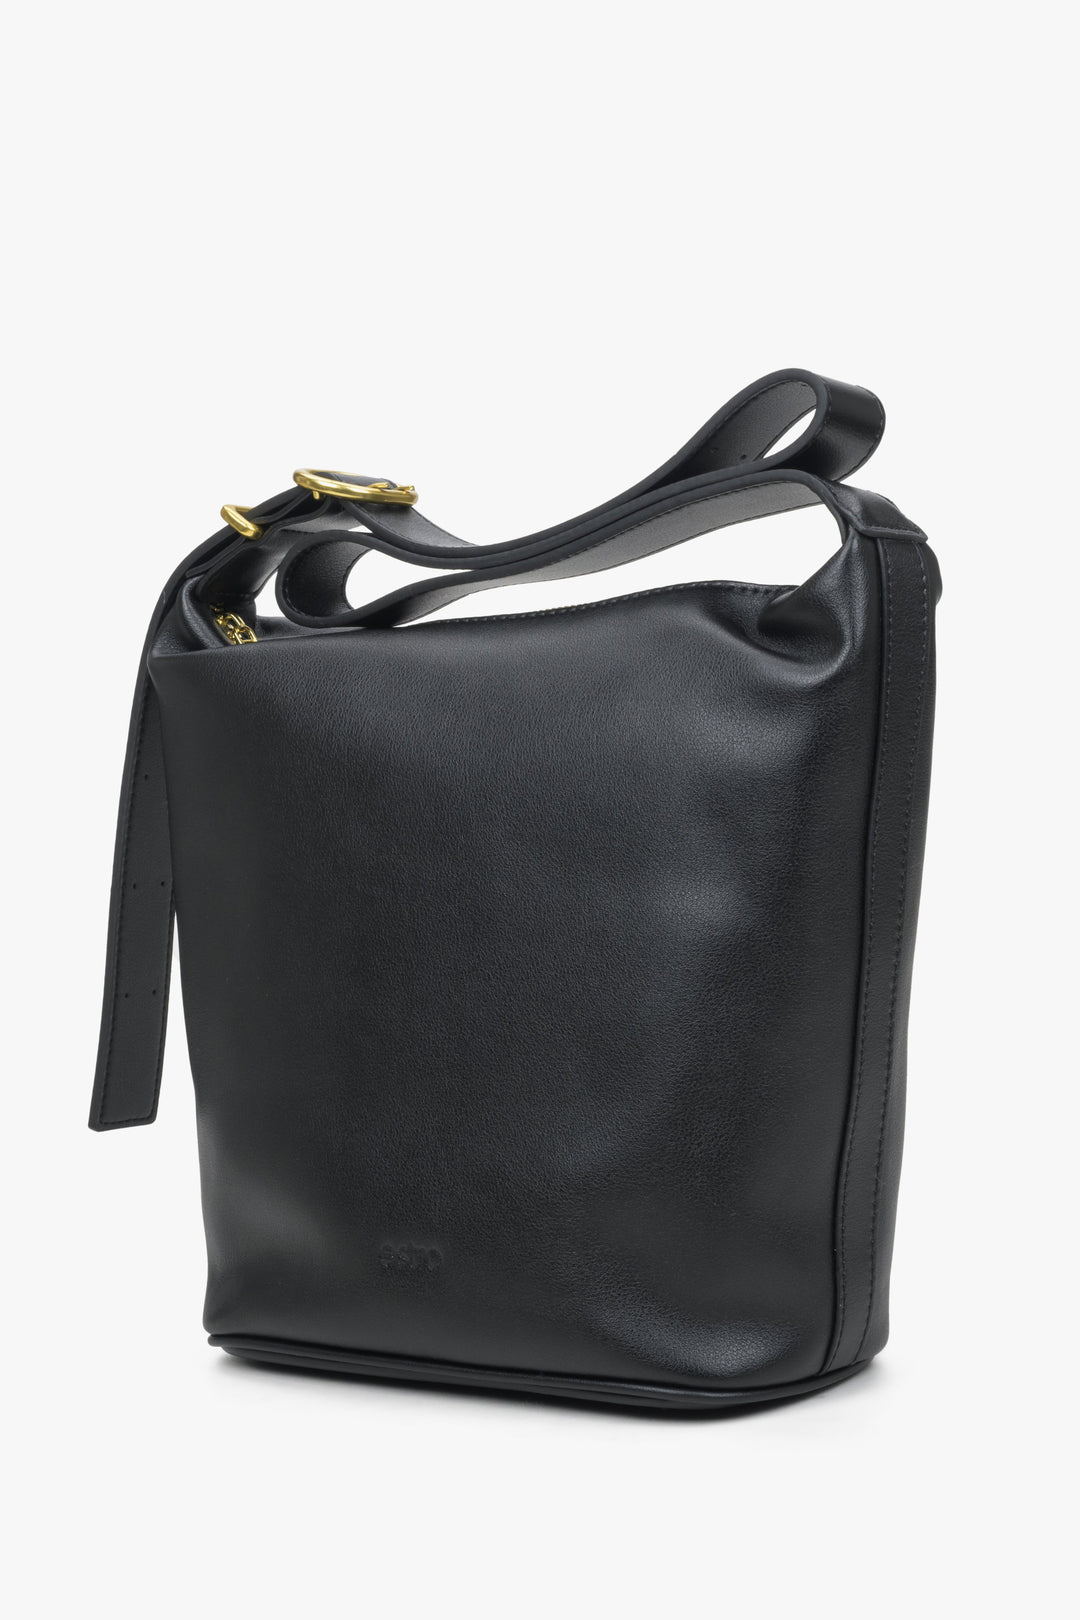 Black leather bucket style bag by Estro.